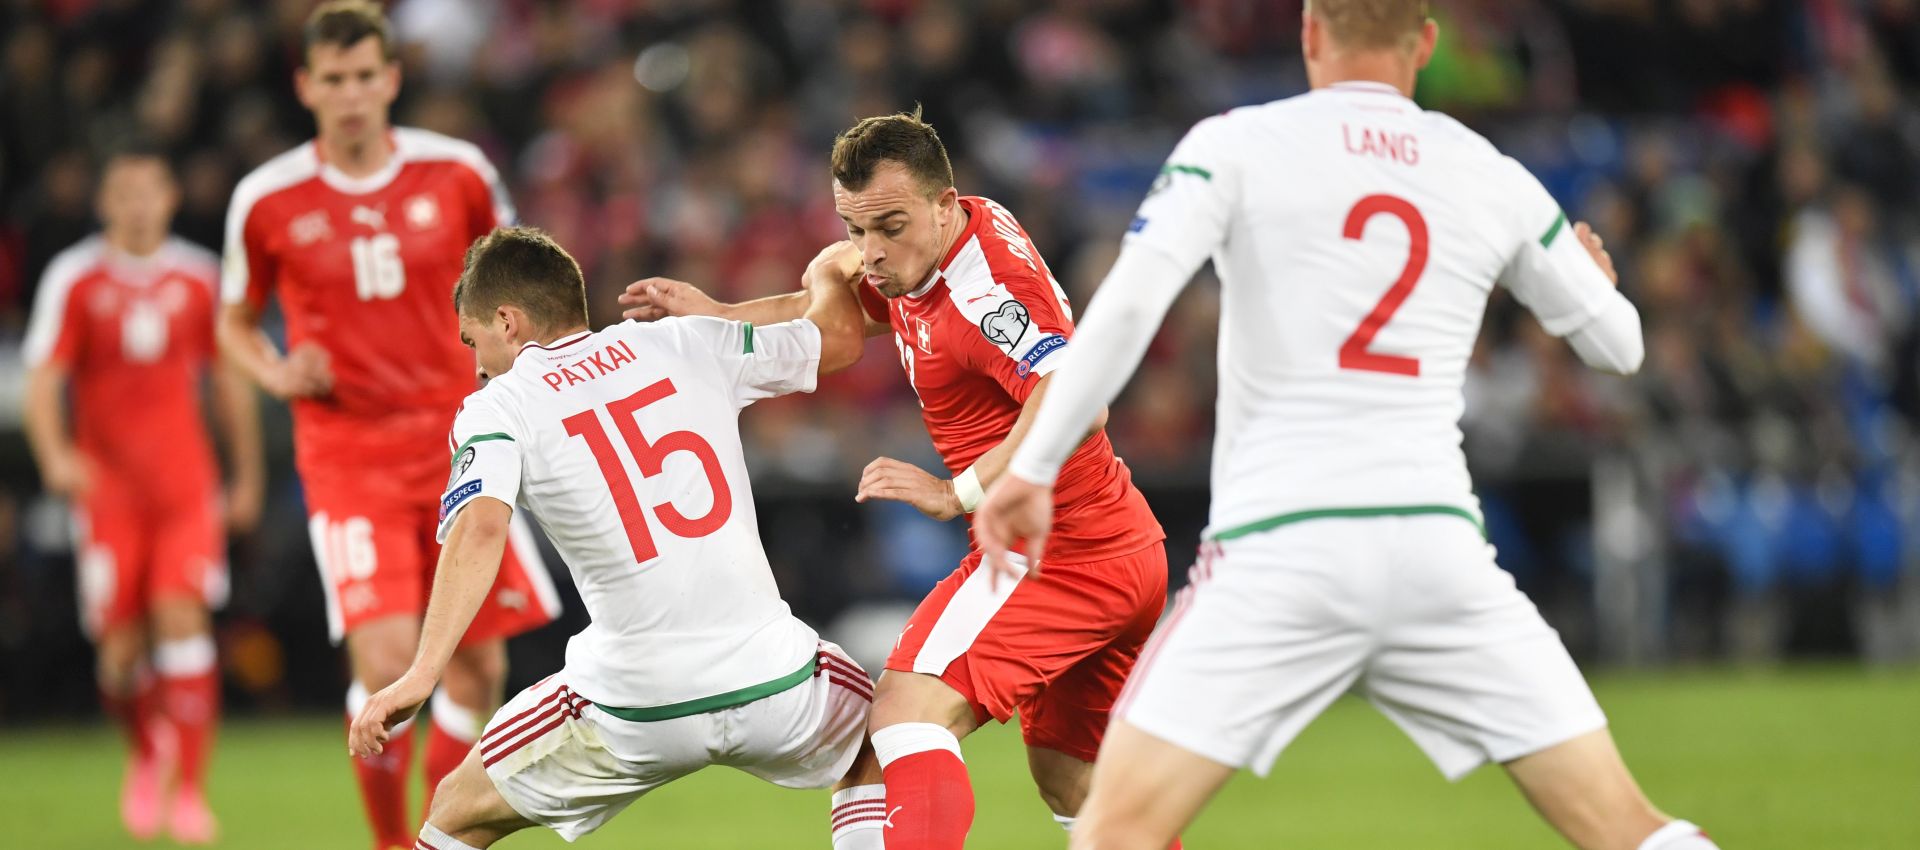 epa06251037 Switzerland's Xherdan Shaqiri (C) fights for the ball with Hungary's Mate Patkai (L) and Adam Lang during the 2018 FIFA World Cup Group B qualification soccer match between Switzerland and Hungary in the St. Jakob-Park stadium in Basel, Switzerland, 07 October 2017.  EPA/GIAN EHRENZELLER